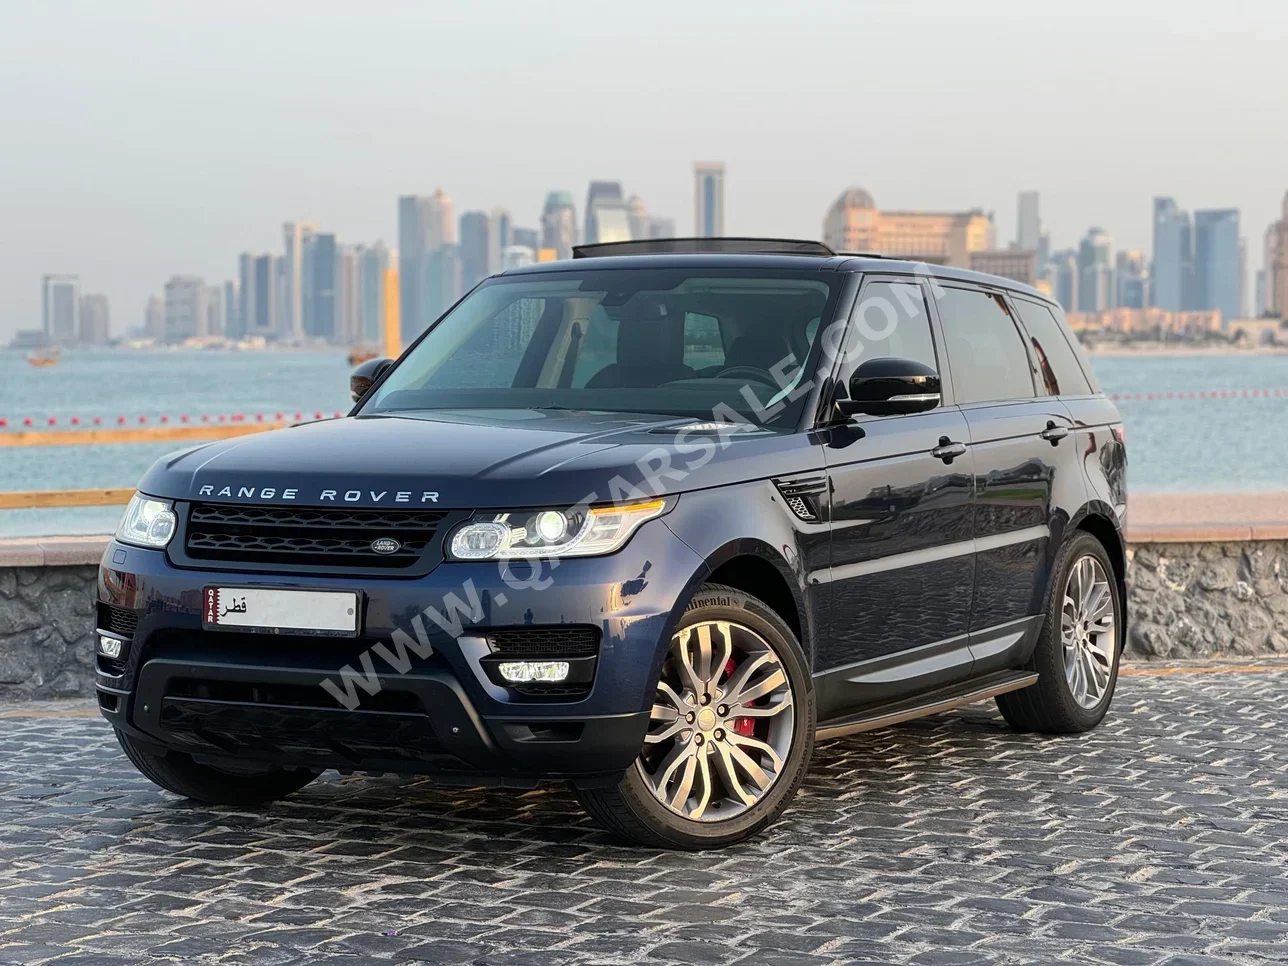 Land Rover  Range Rover  Sport Dynamic  2014  Automatic  138,009 Km  8 Cylinder  Four Wheel Drive (4WD)  SUV  Blue